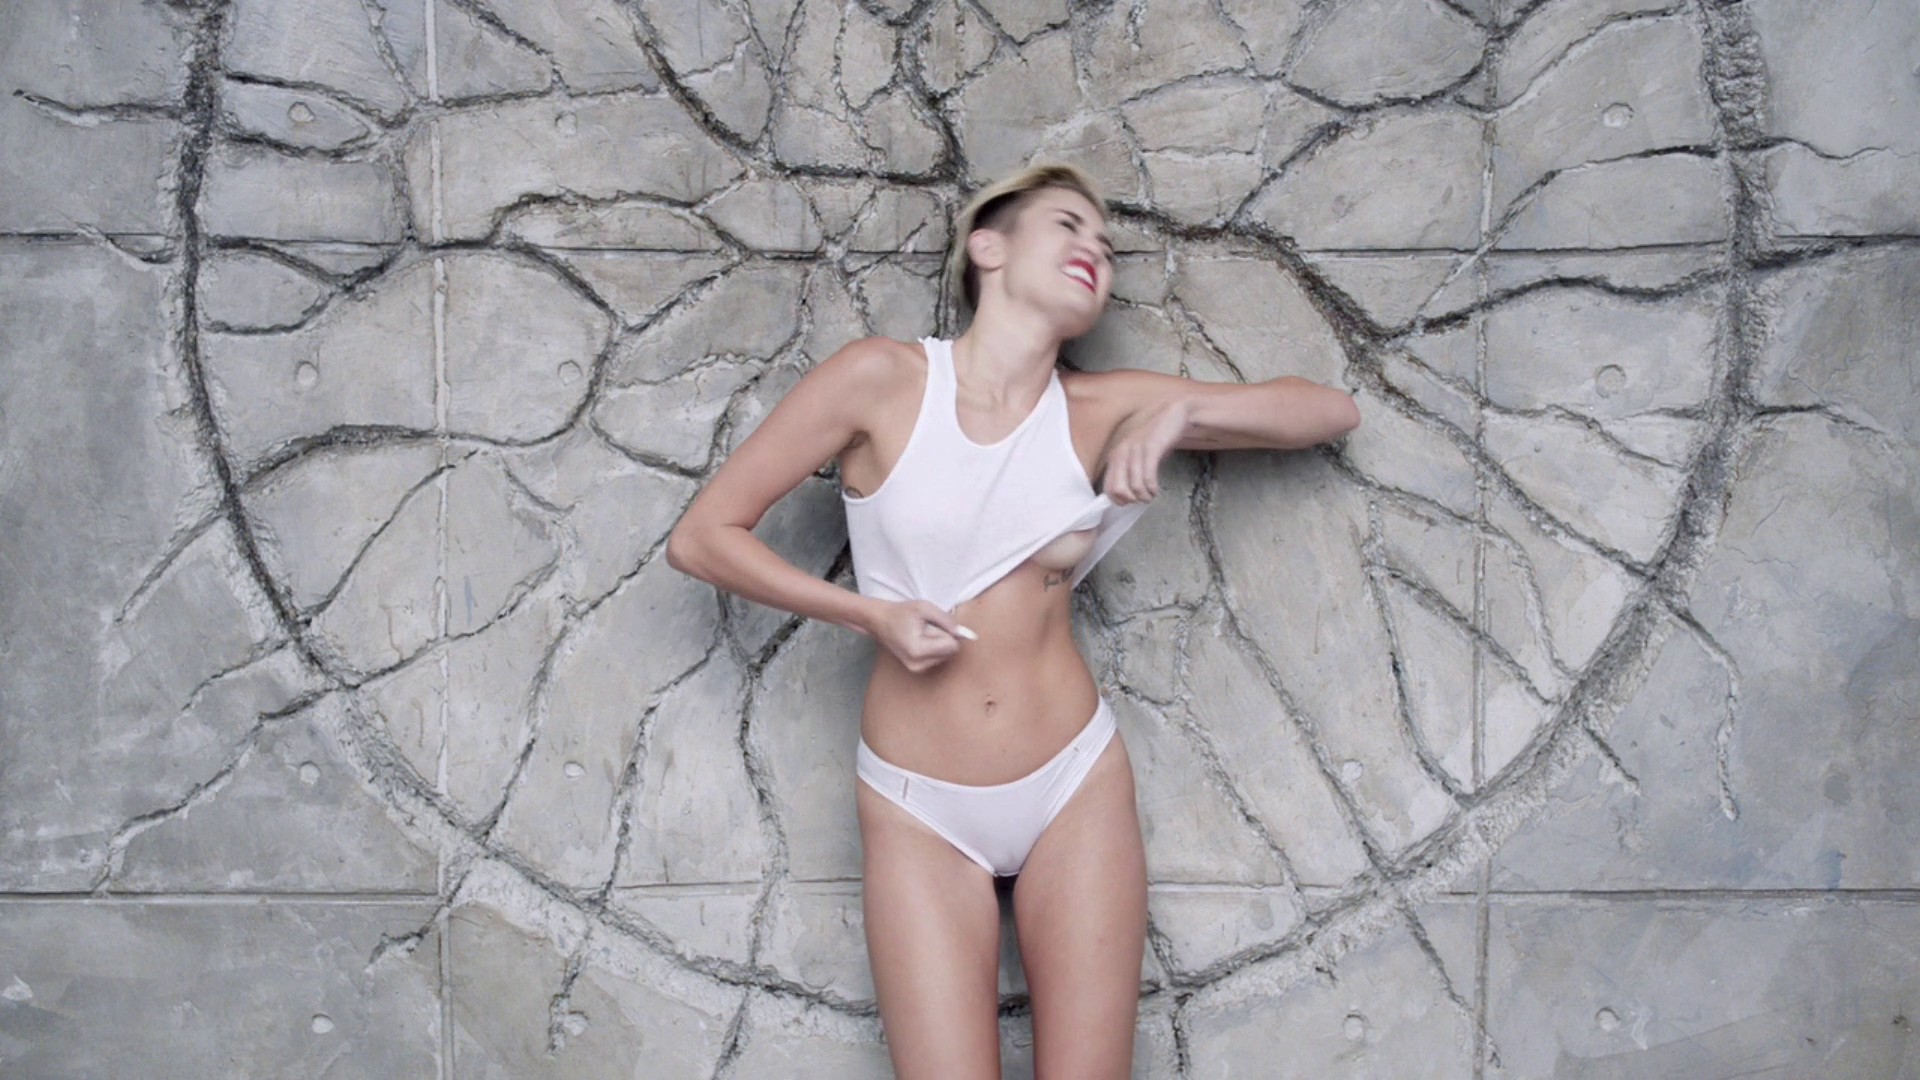 Miley Cyrus - Wrecking Ball explicit uncensored video 1080p4313.jpg